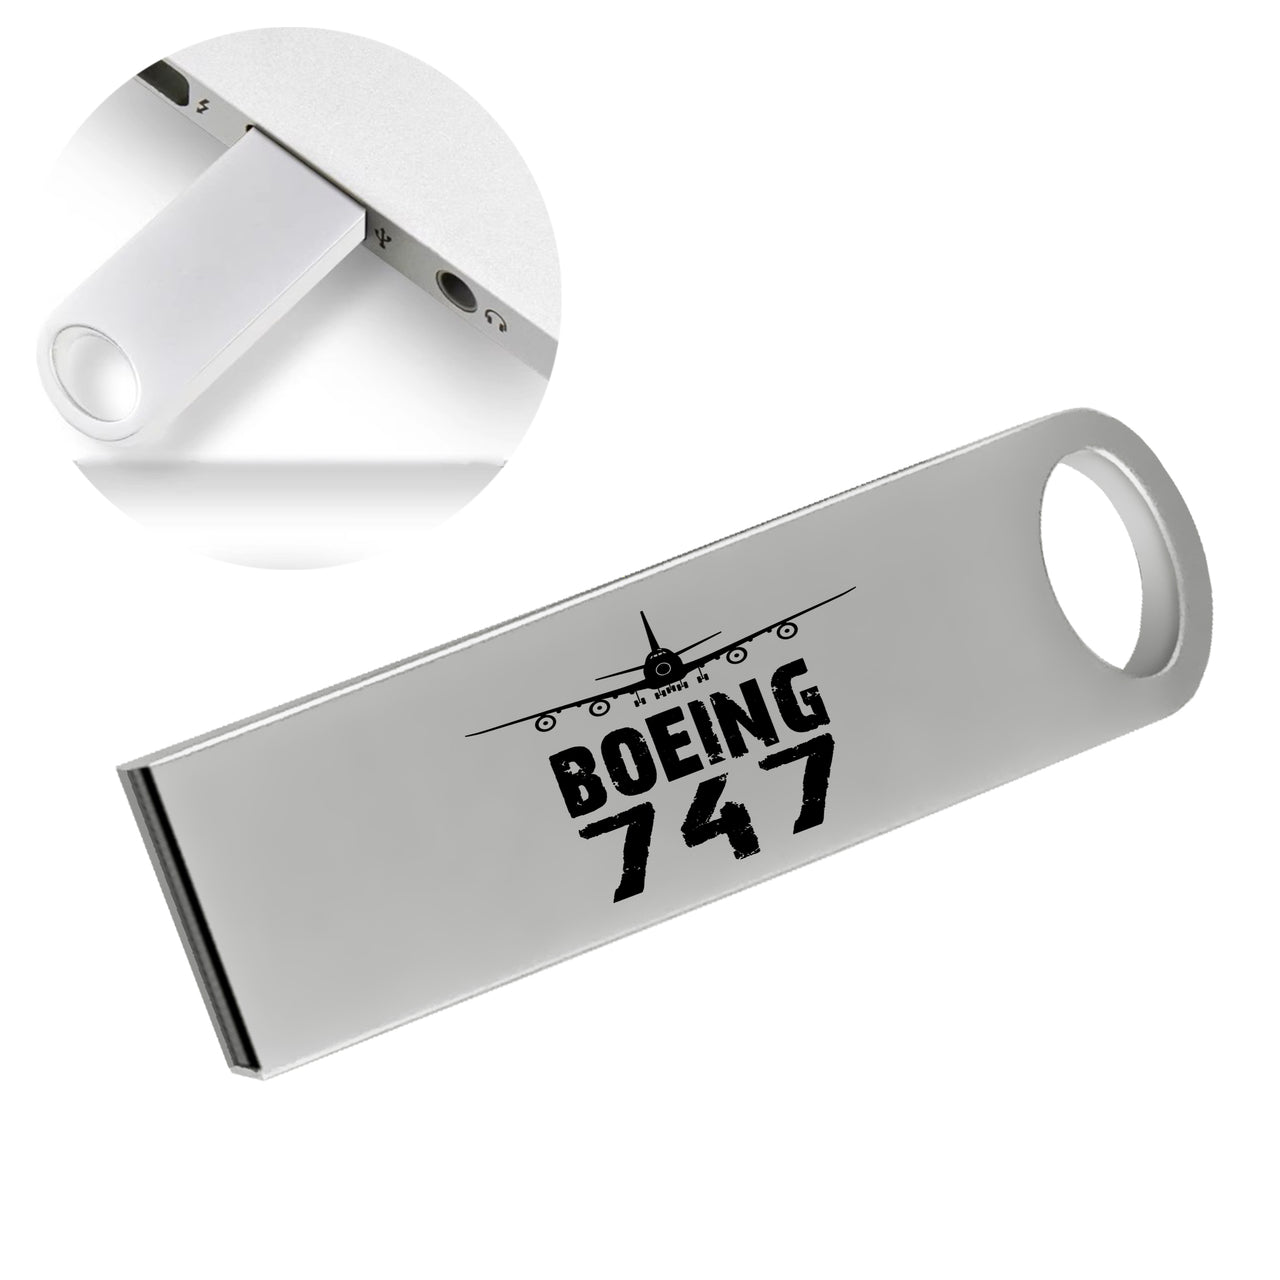 Boeing 747 & Plane Designed Waterproof USB Devices